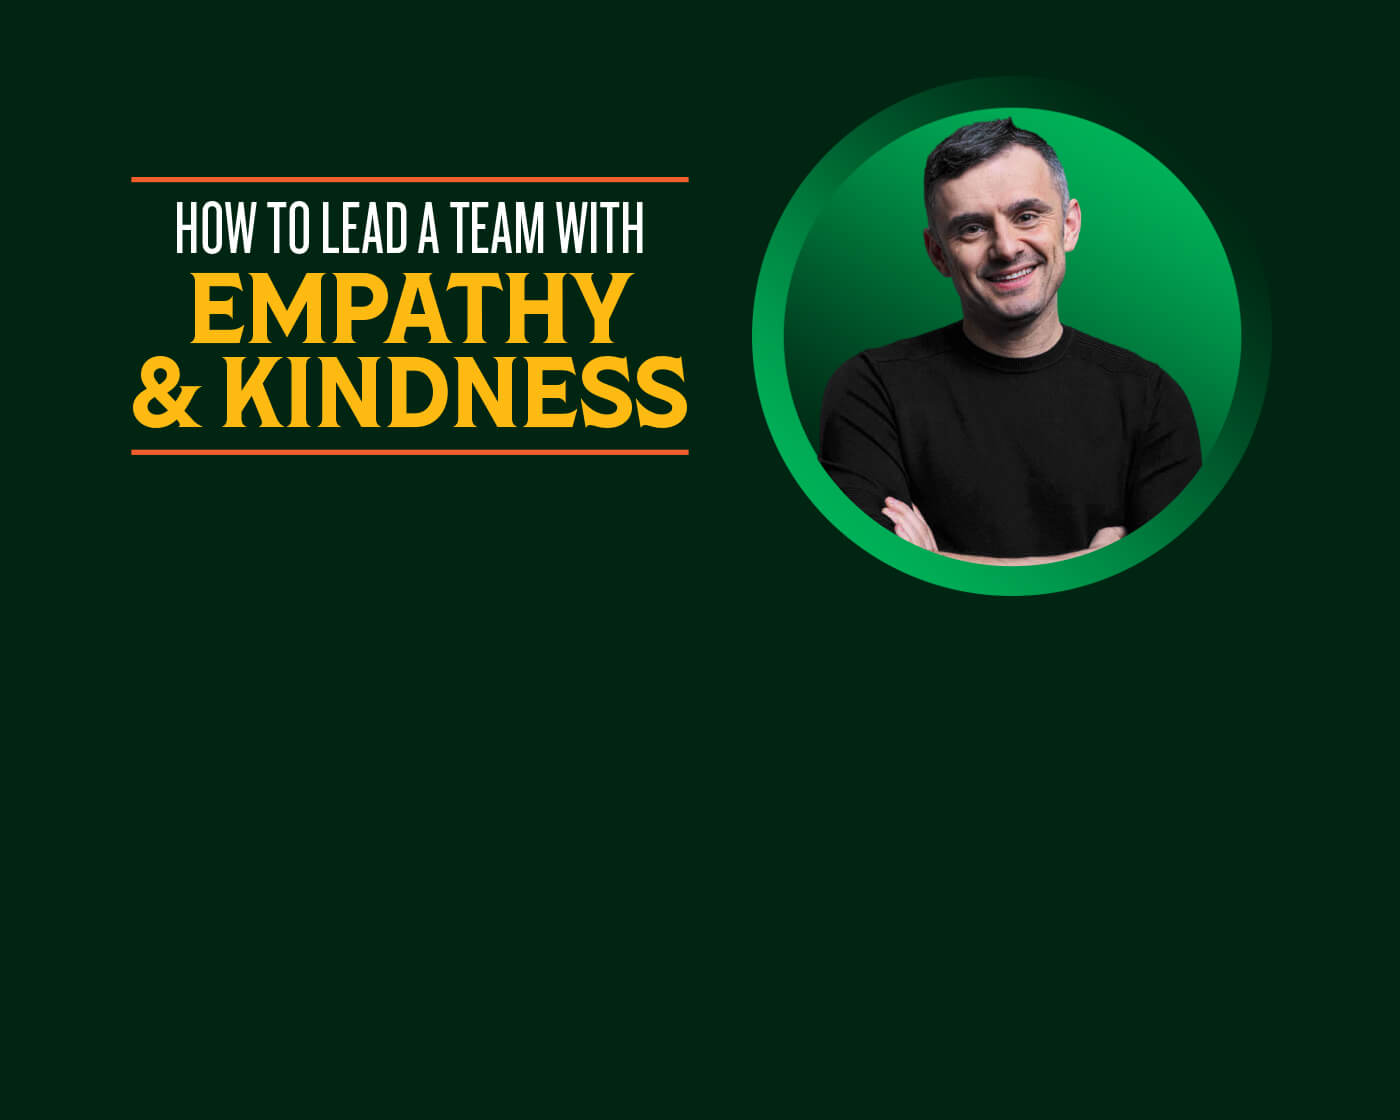 How to Lead a Team With Empathy and Kindness